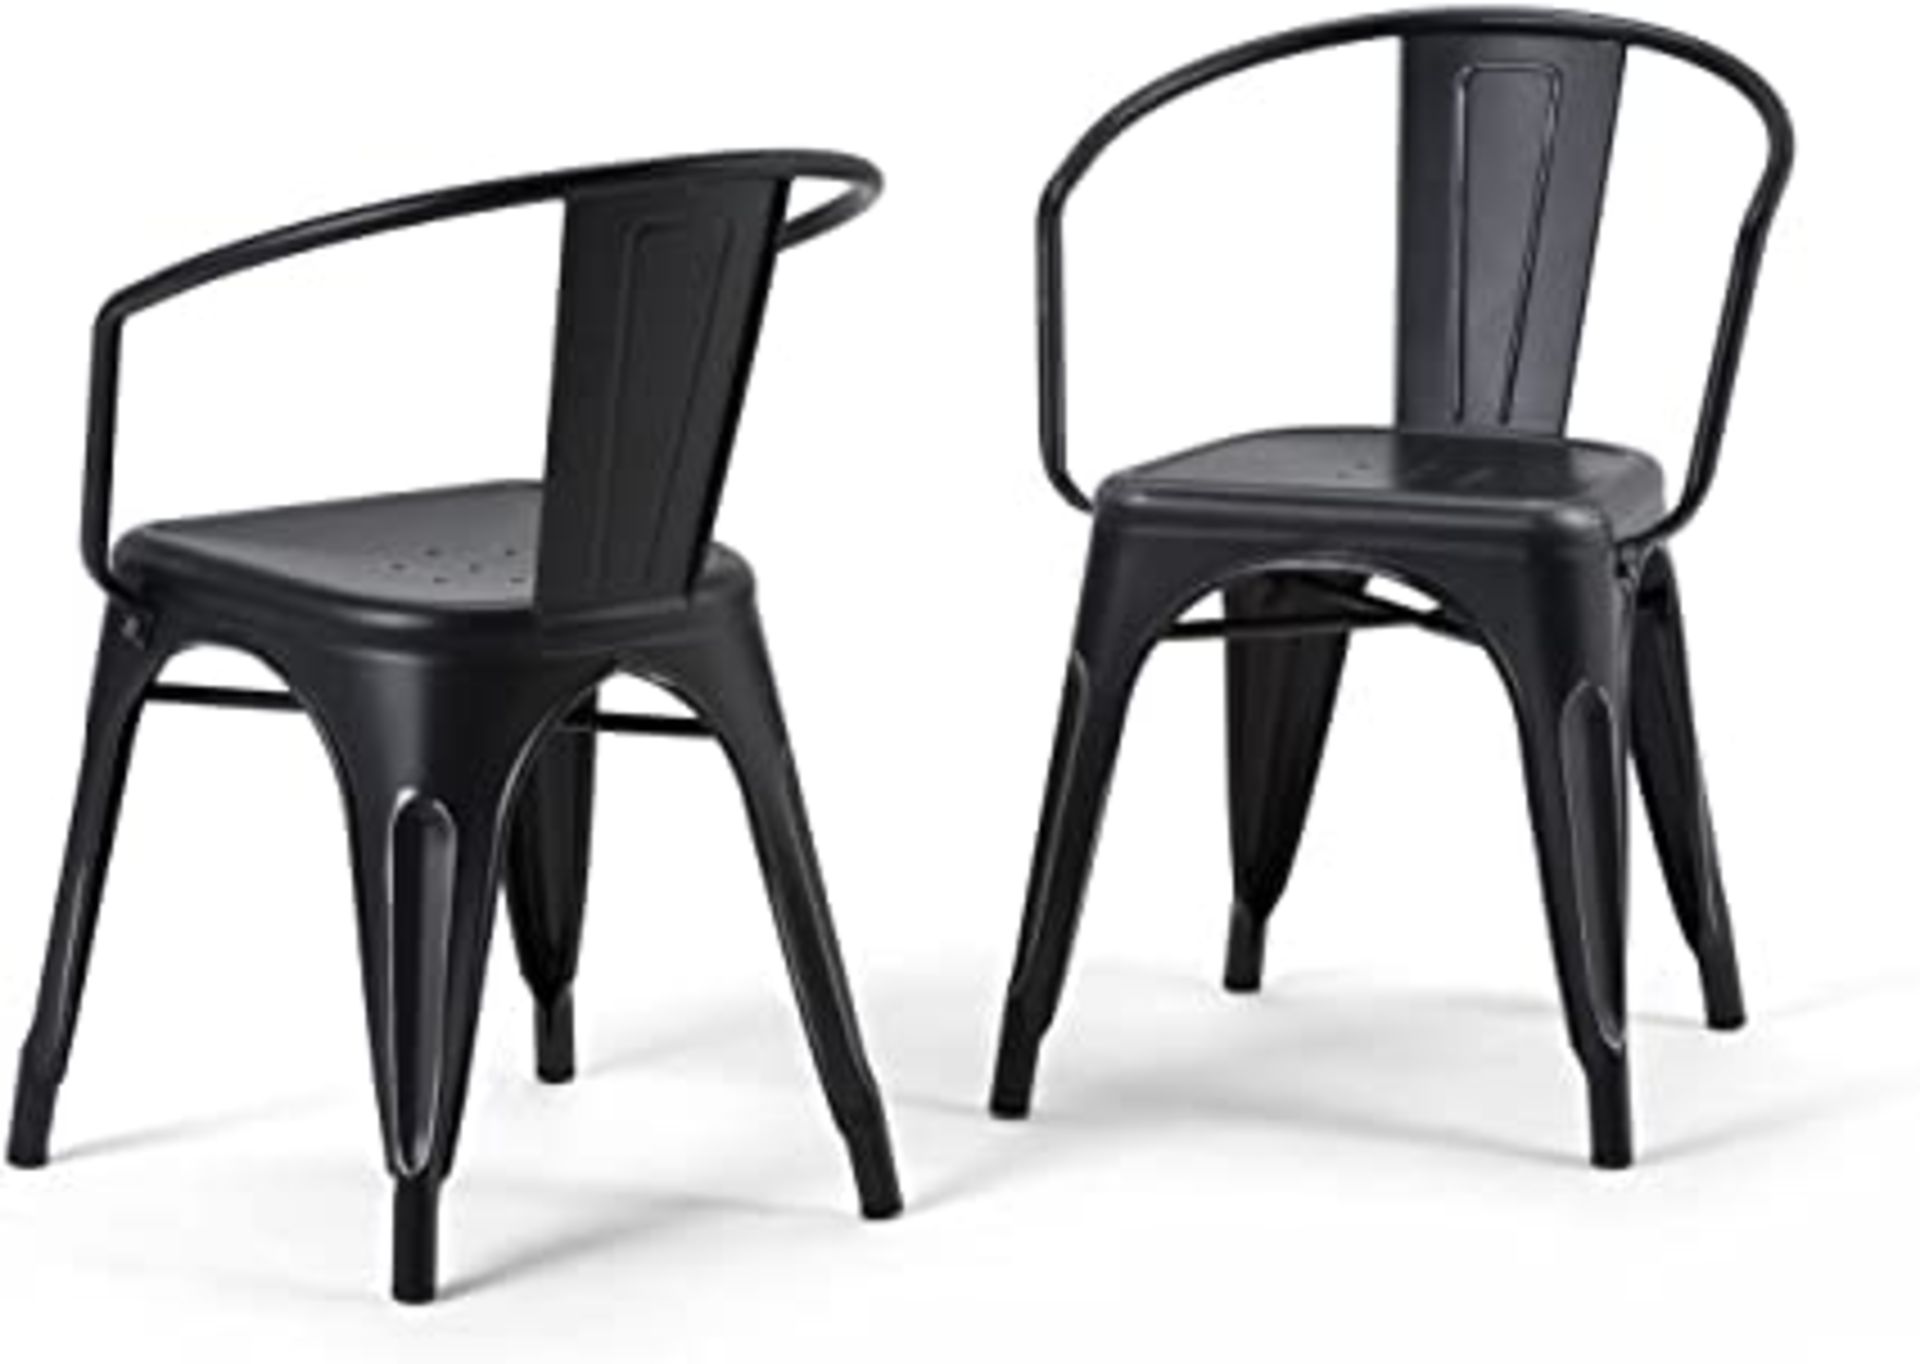 4 x Industrial Tolix Style Stackable Chairs With Armrests - Finish: BLACK - Ideal For Bistros, Pub - Image 3 of 3